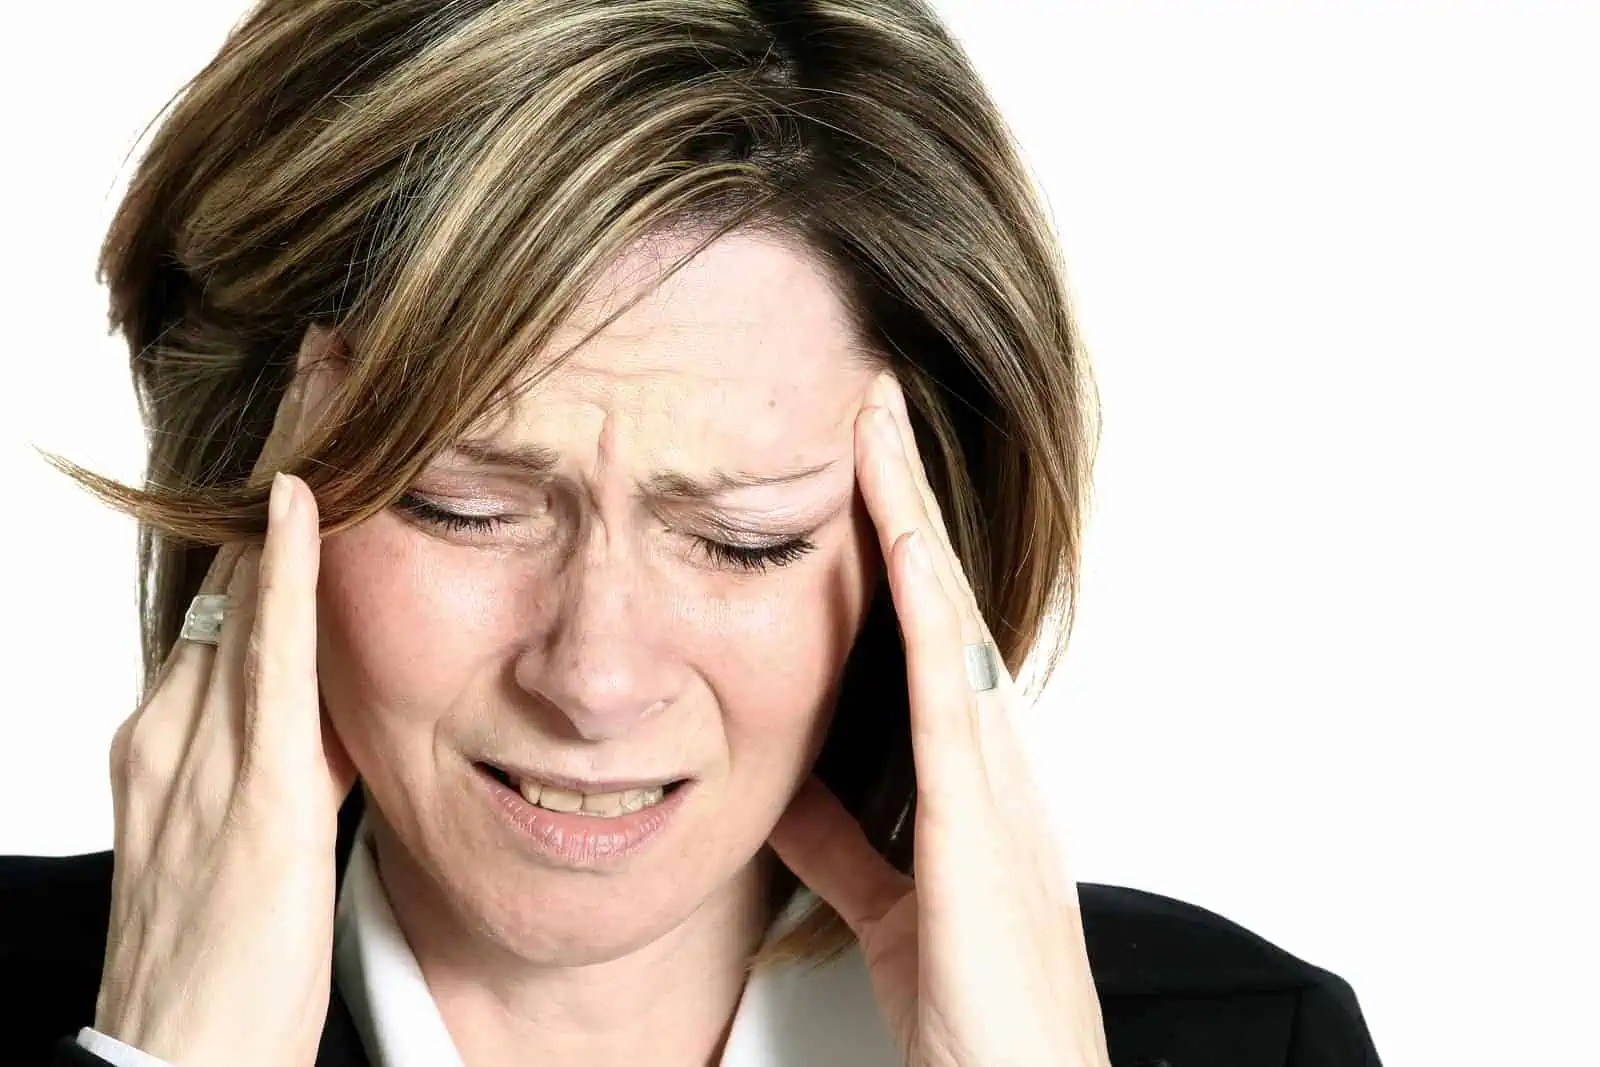 Businesswoman with headache holding her head and grimacing in pain